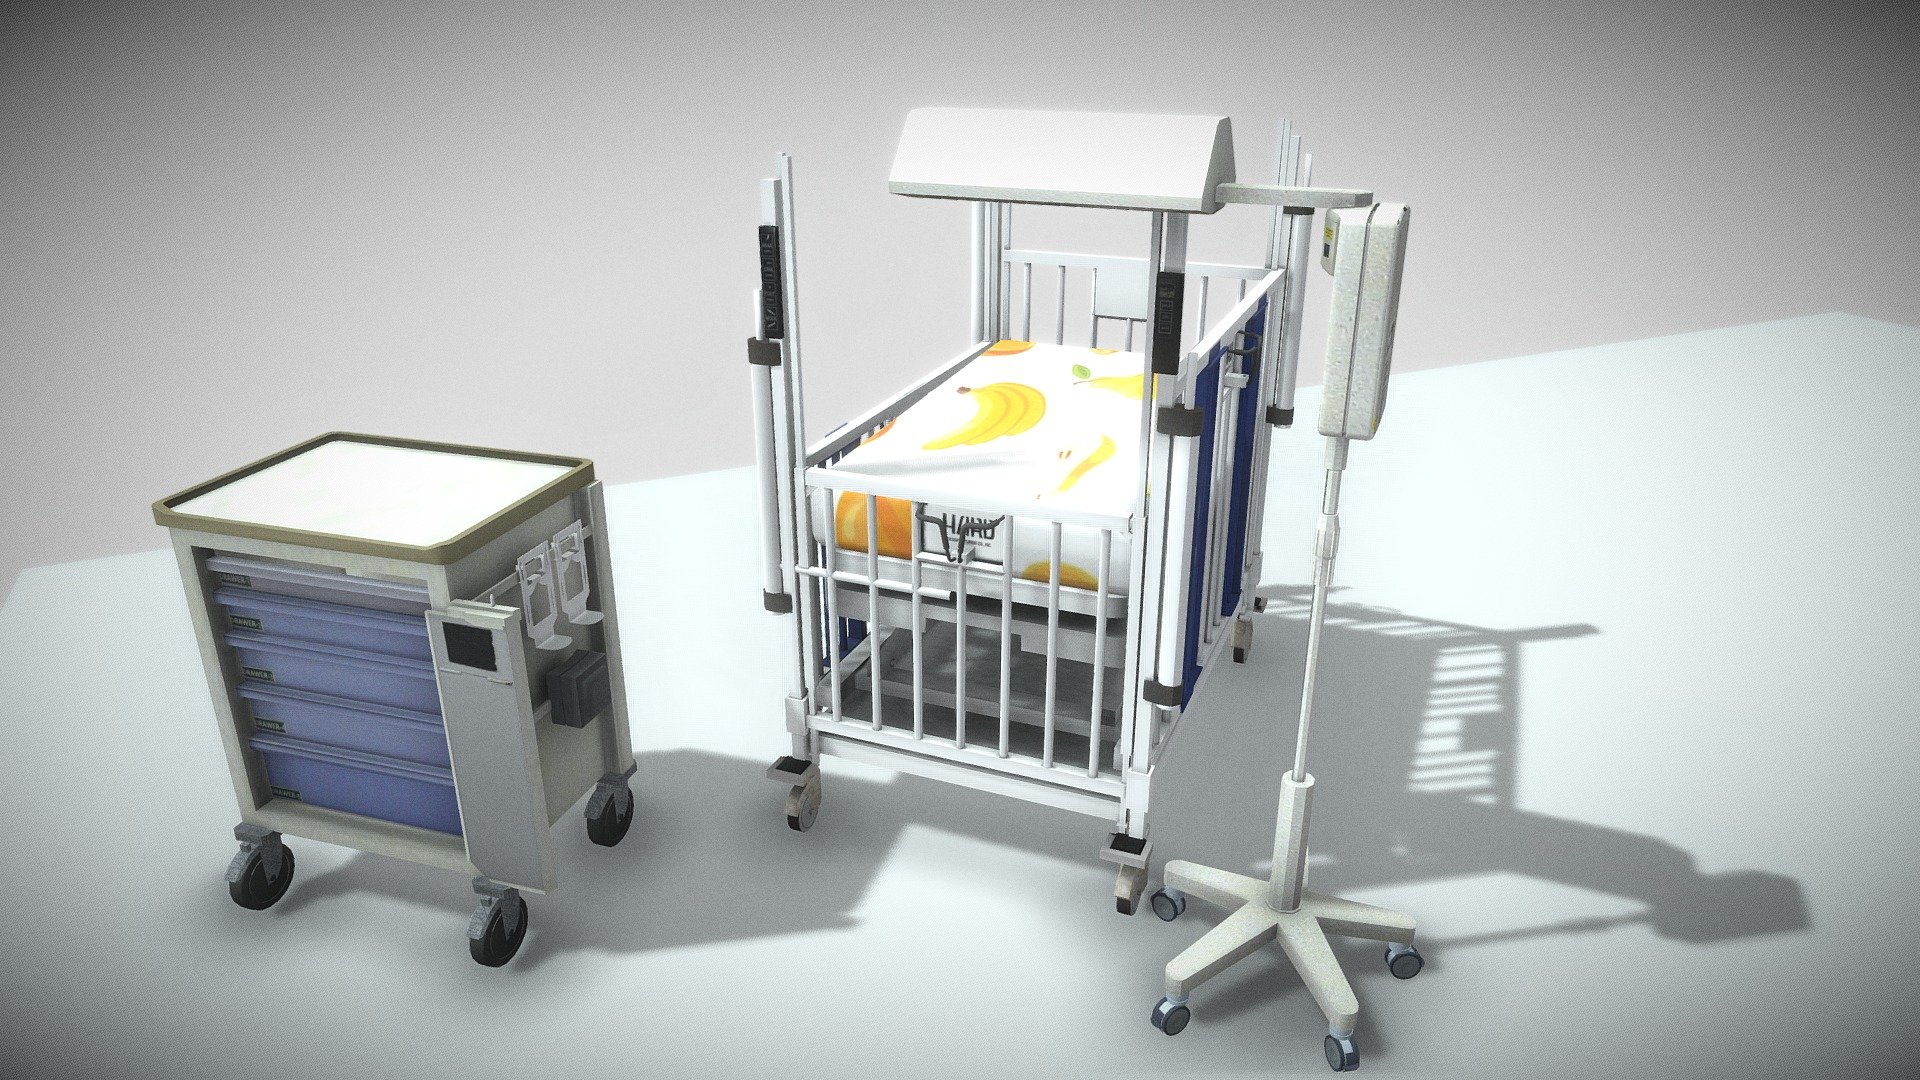 The Doernbecher Critical Care Crib, designed by Dr. Brahm Goldstein and produced by Hard Manufacturing Company, addresses the specific problems encountered in pediatric intensive care units. The prototype was tested at Doernbecher Children's Hospital in the pediatric intensive care unit

low poly

texture : 4 texture

compatible with Unity and Unreal

STL file is clean for 3d printing

suitable for high render or Games Assets, VR / AR

render engine: Vray or standard scanline ( textures baked ) - pediatric intensive care unit crib bed Low-poly - Buy Royalty Free 3D model by bouaraour 3d model